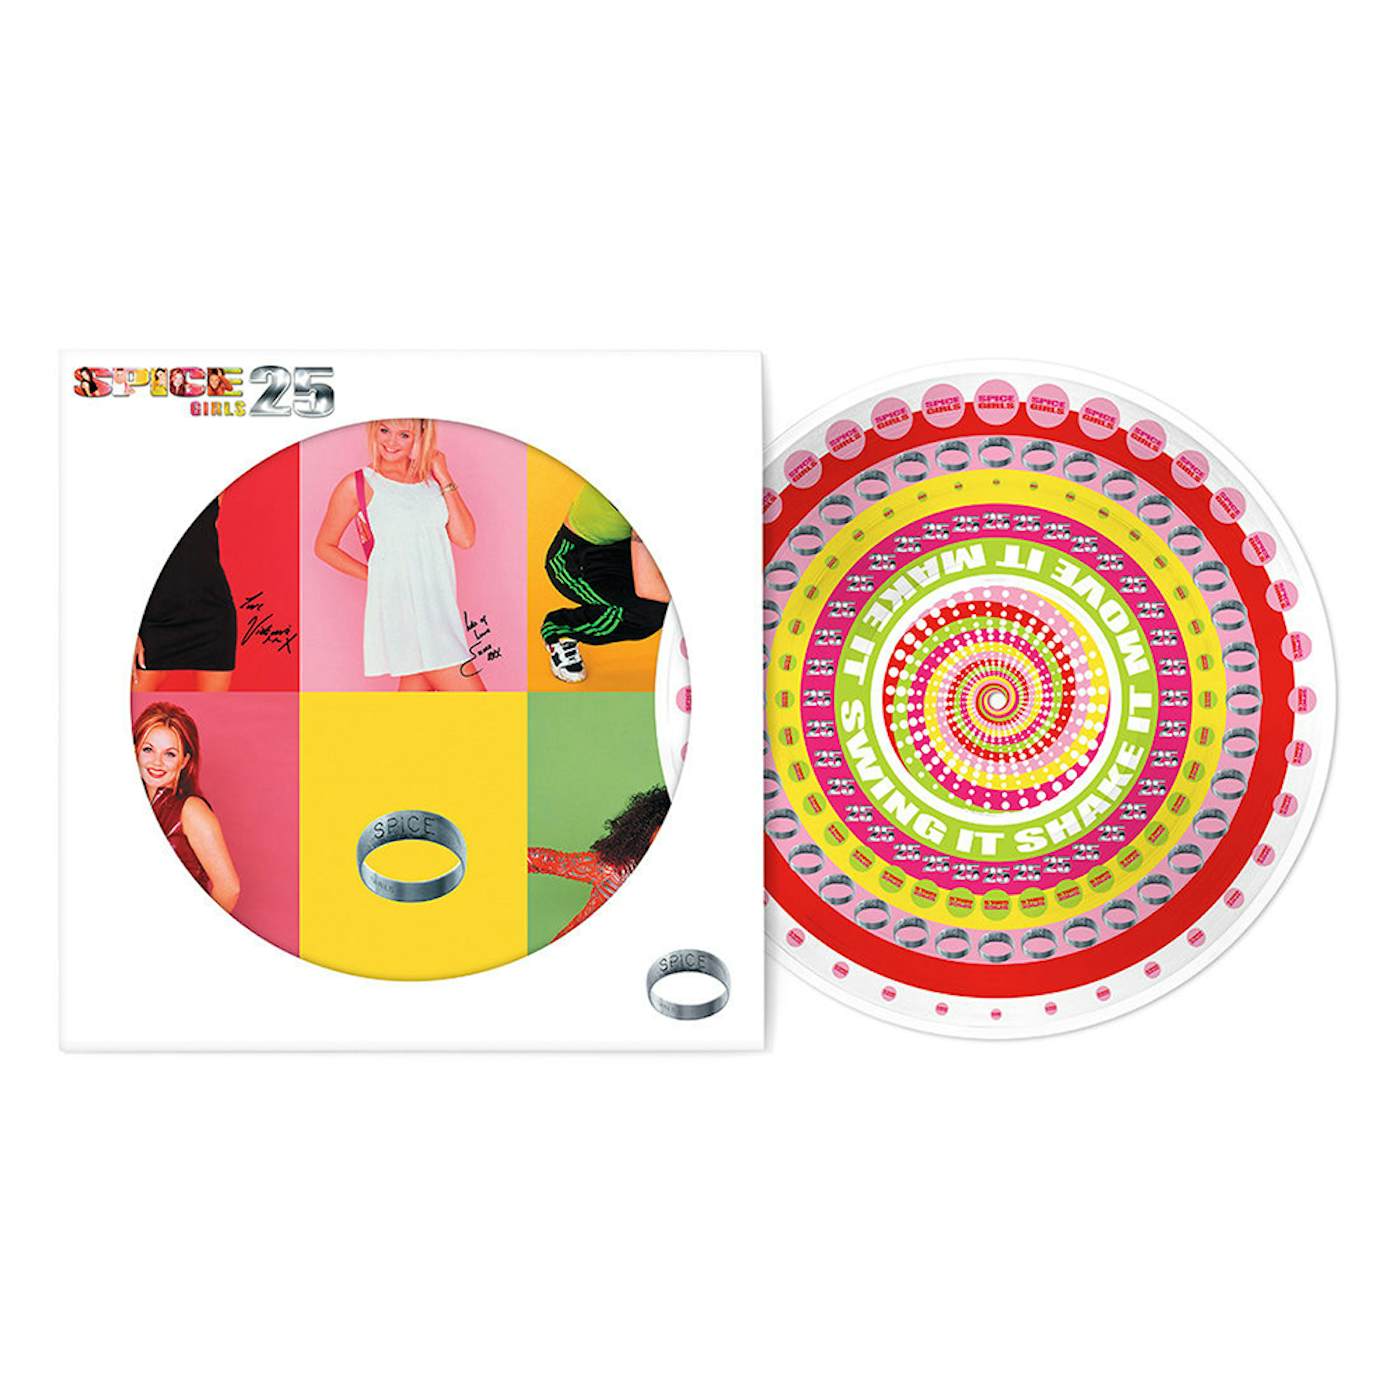 Spice Girls SPICE - 25TH ANNIVERSARY (ZOETROPE PICTURE DISC)